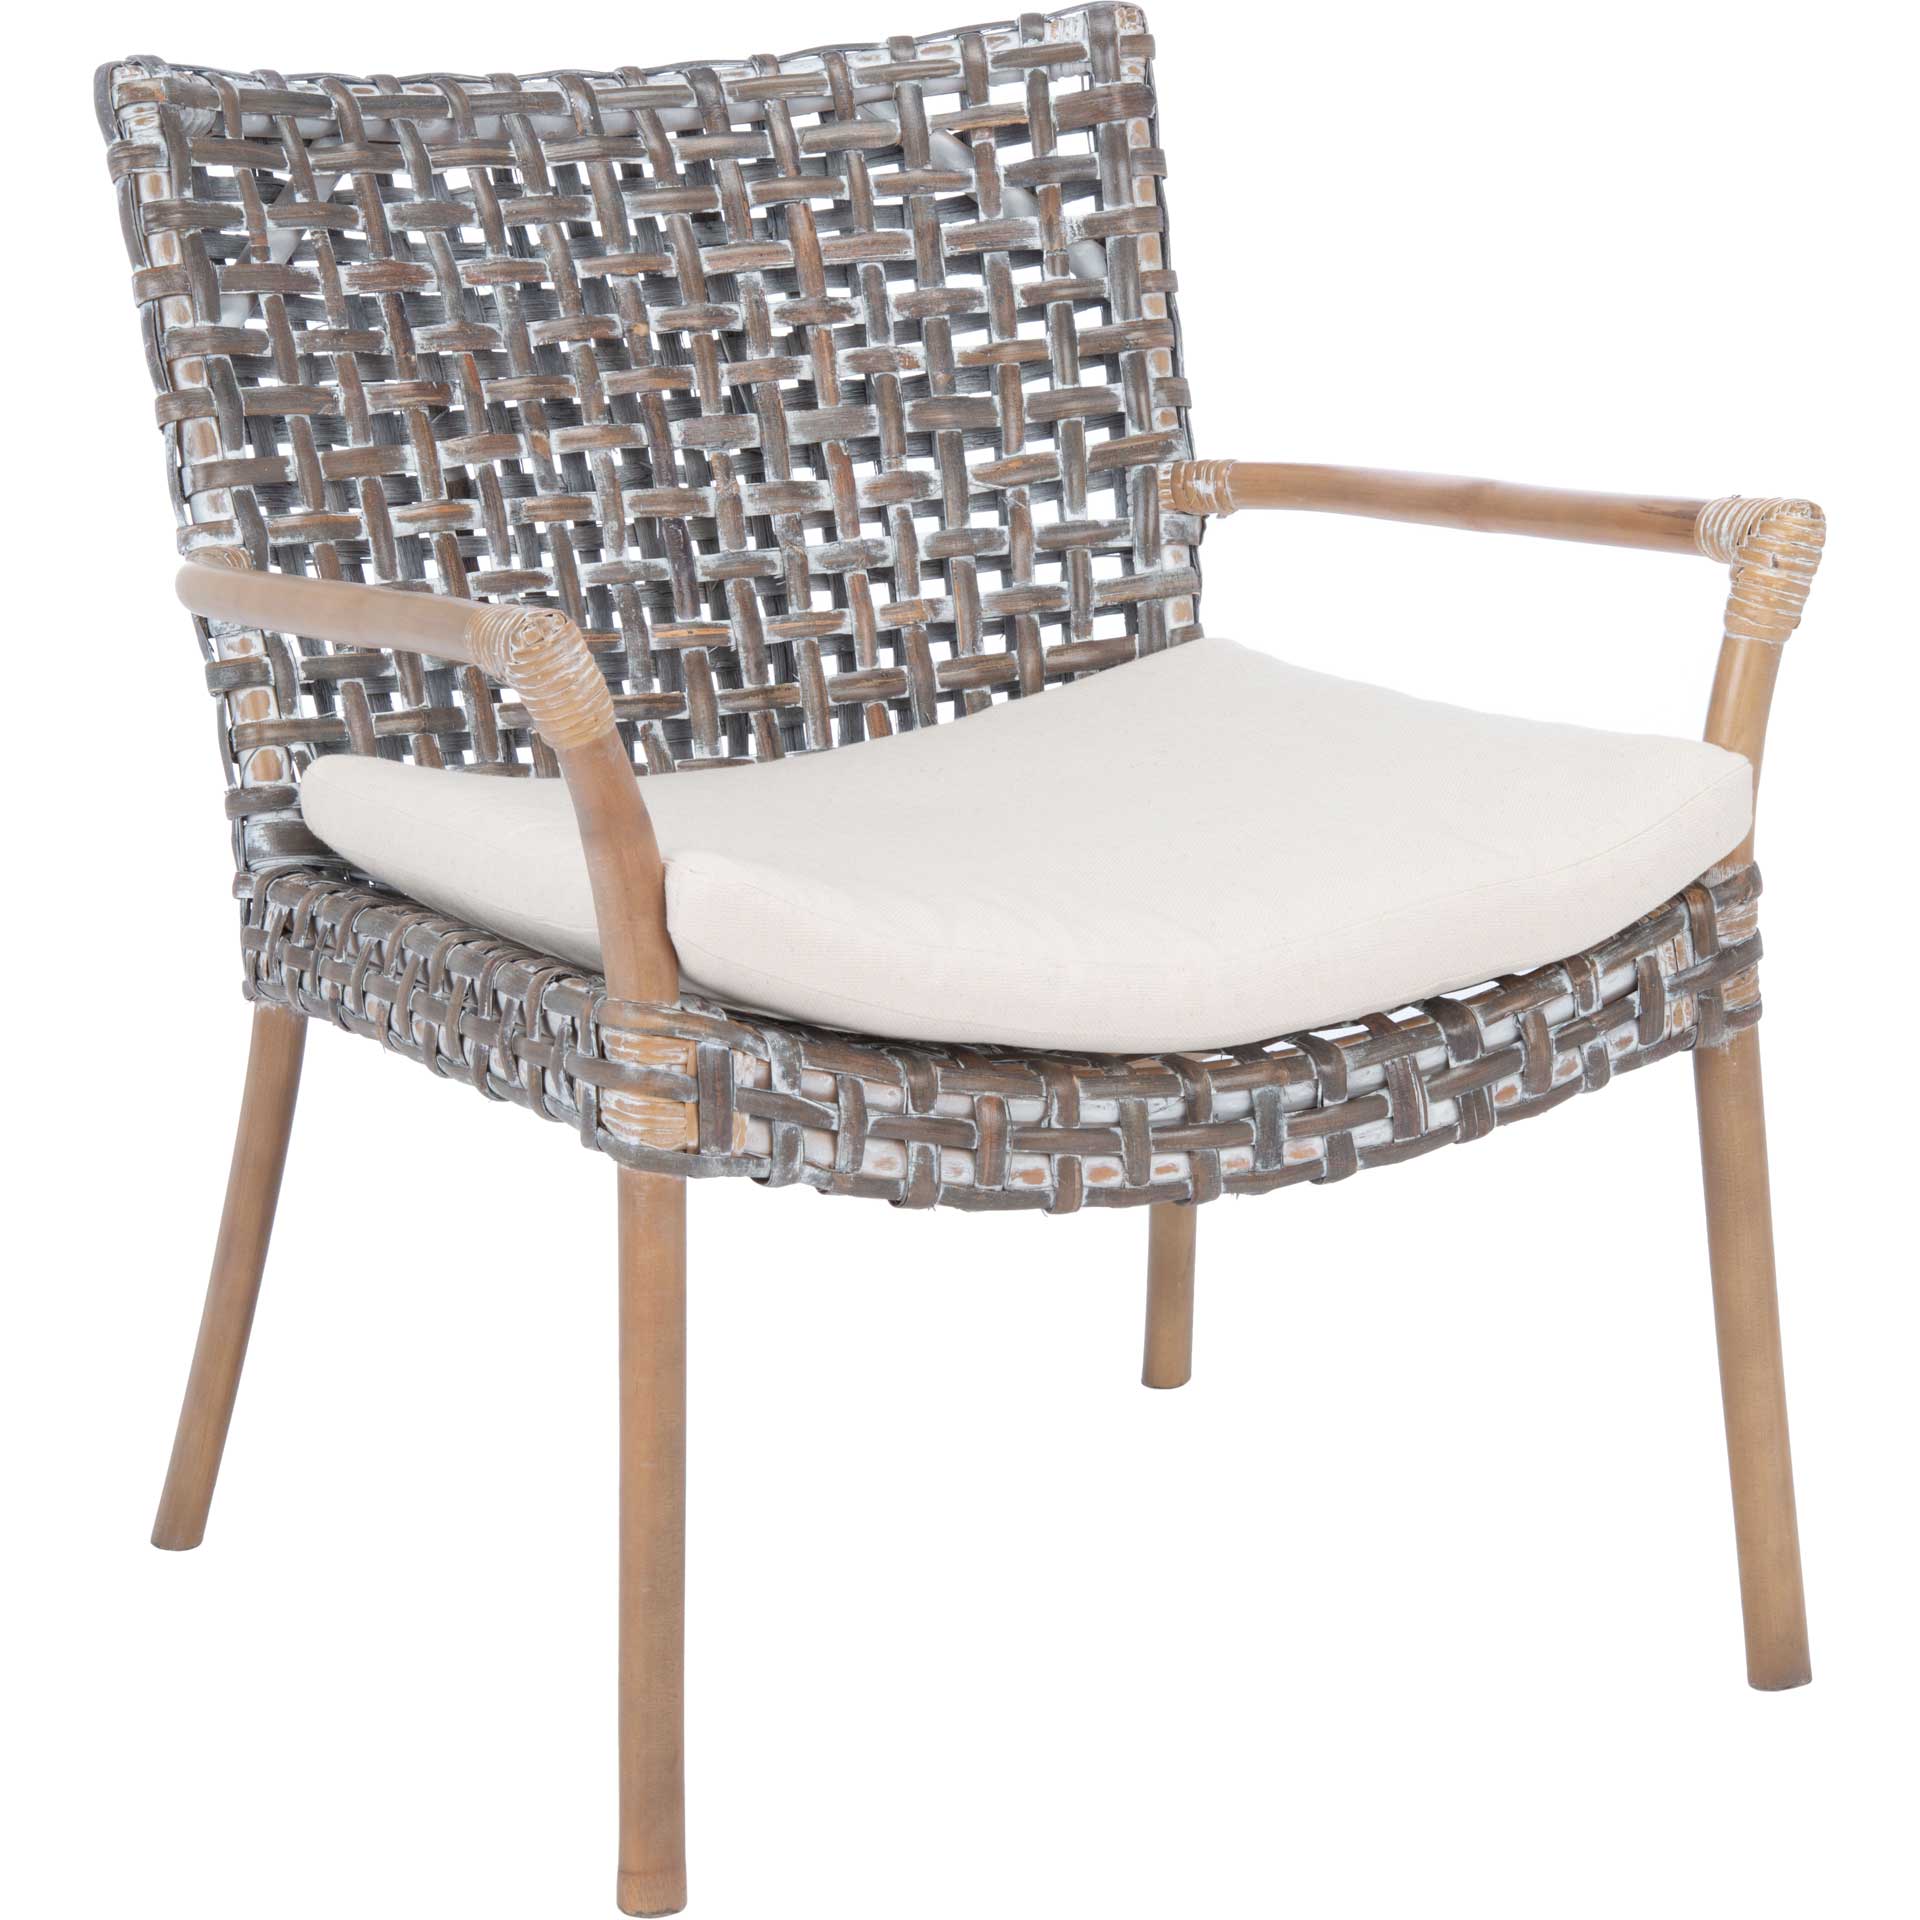 Convey Rattan Accent Chair Gray White Wash